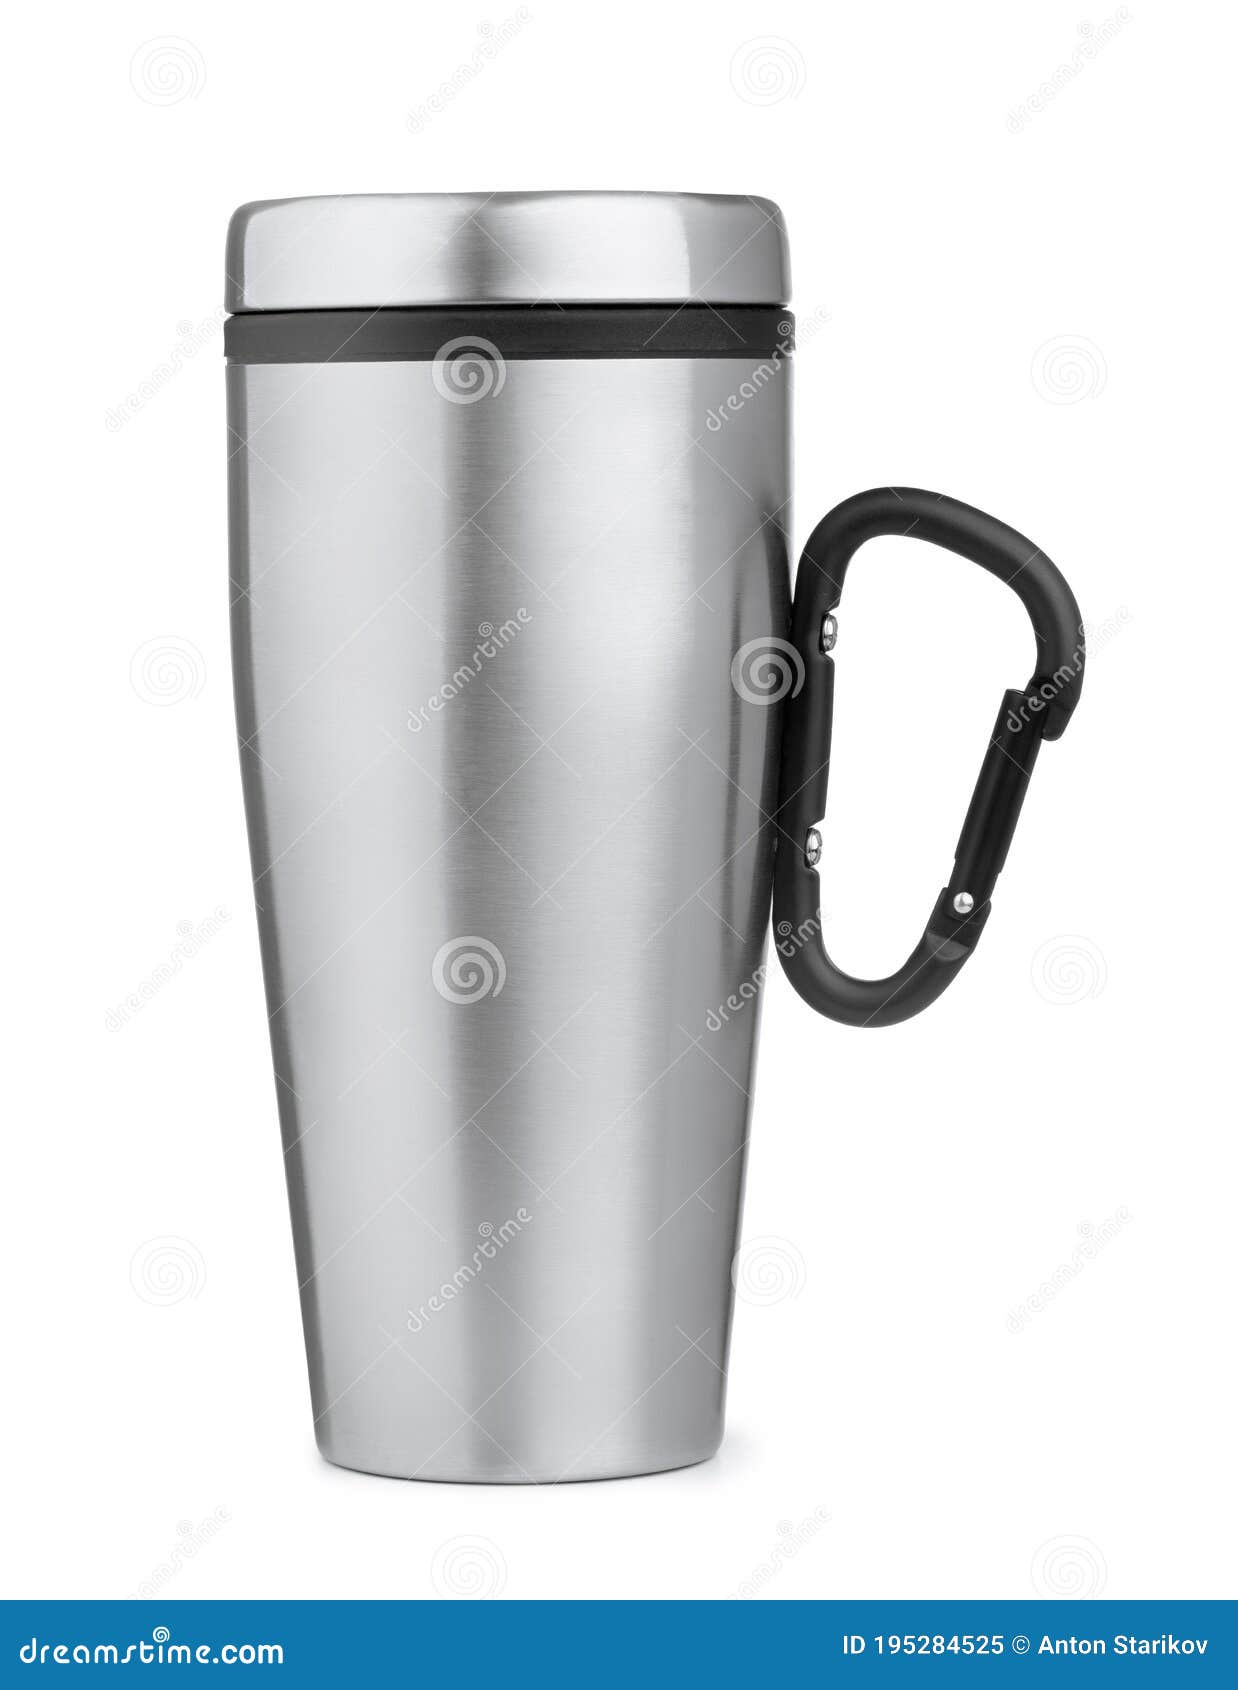 stainless steel thermo mug